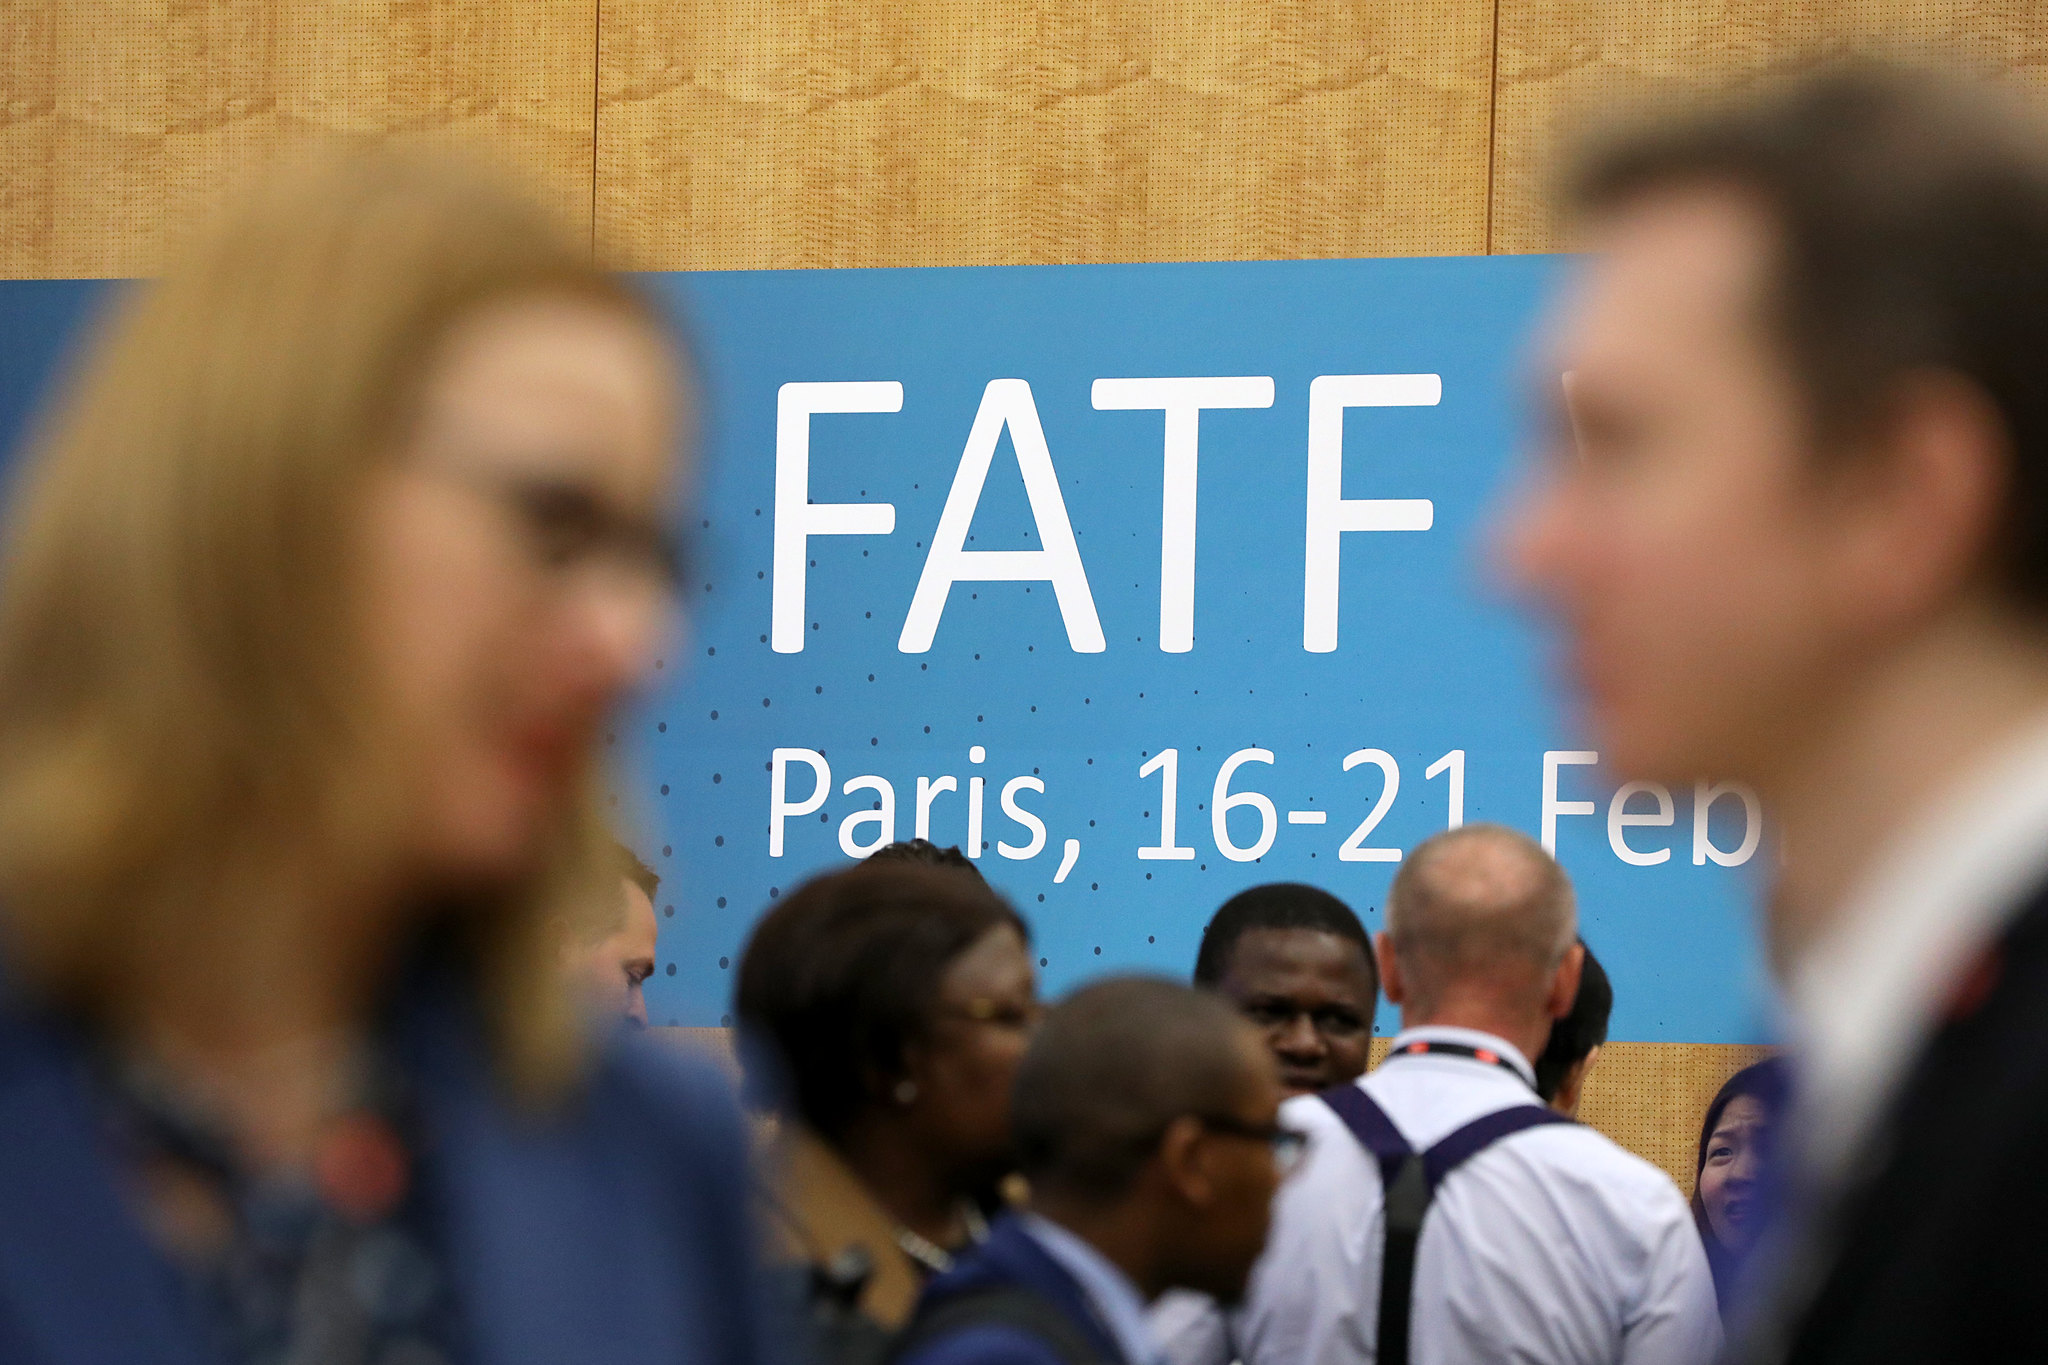 User-profiling-can-help-regulators-identify-illegal-crypto-activity,-says-fatf